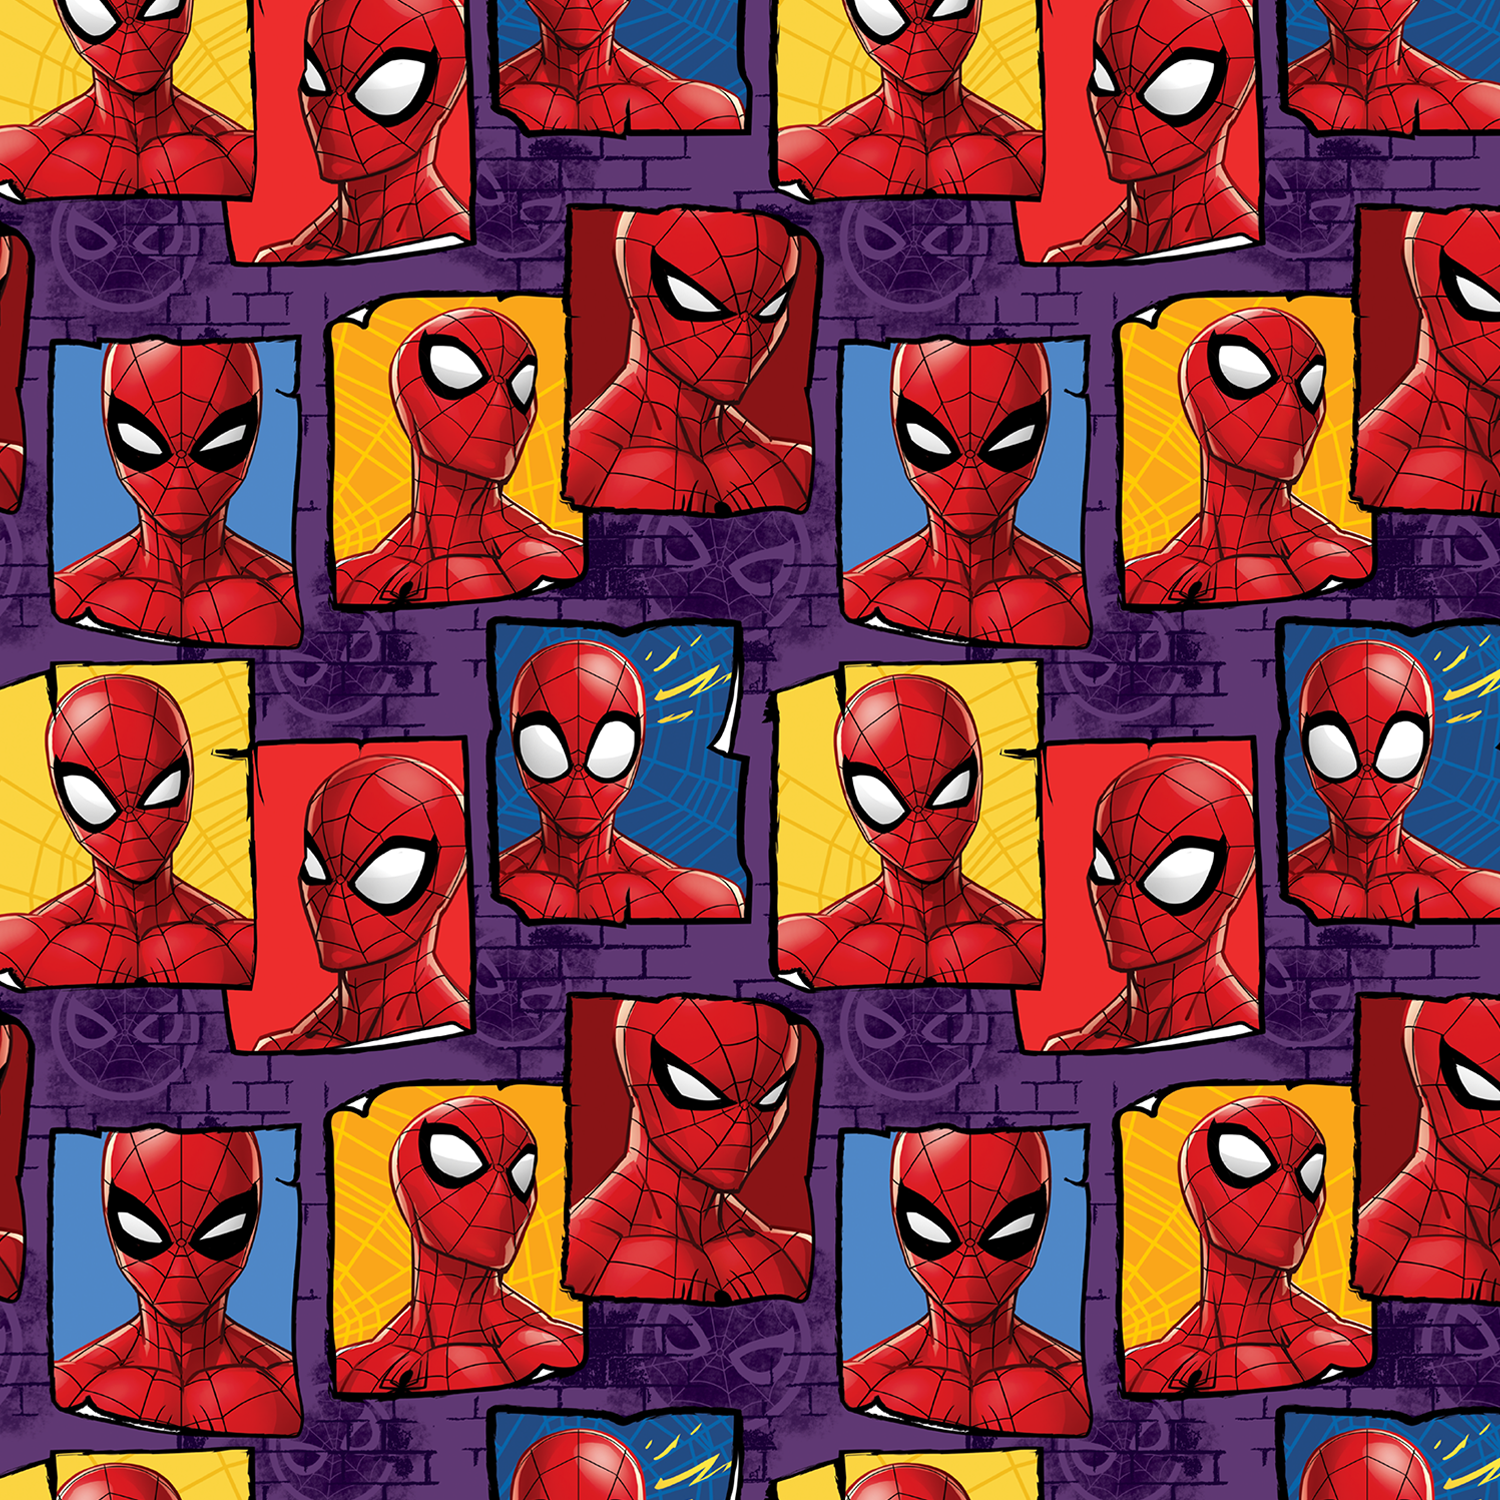 Marvel's Spider-Man Giftwrap - Party Centre